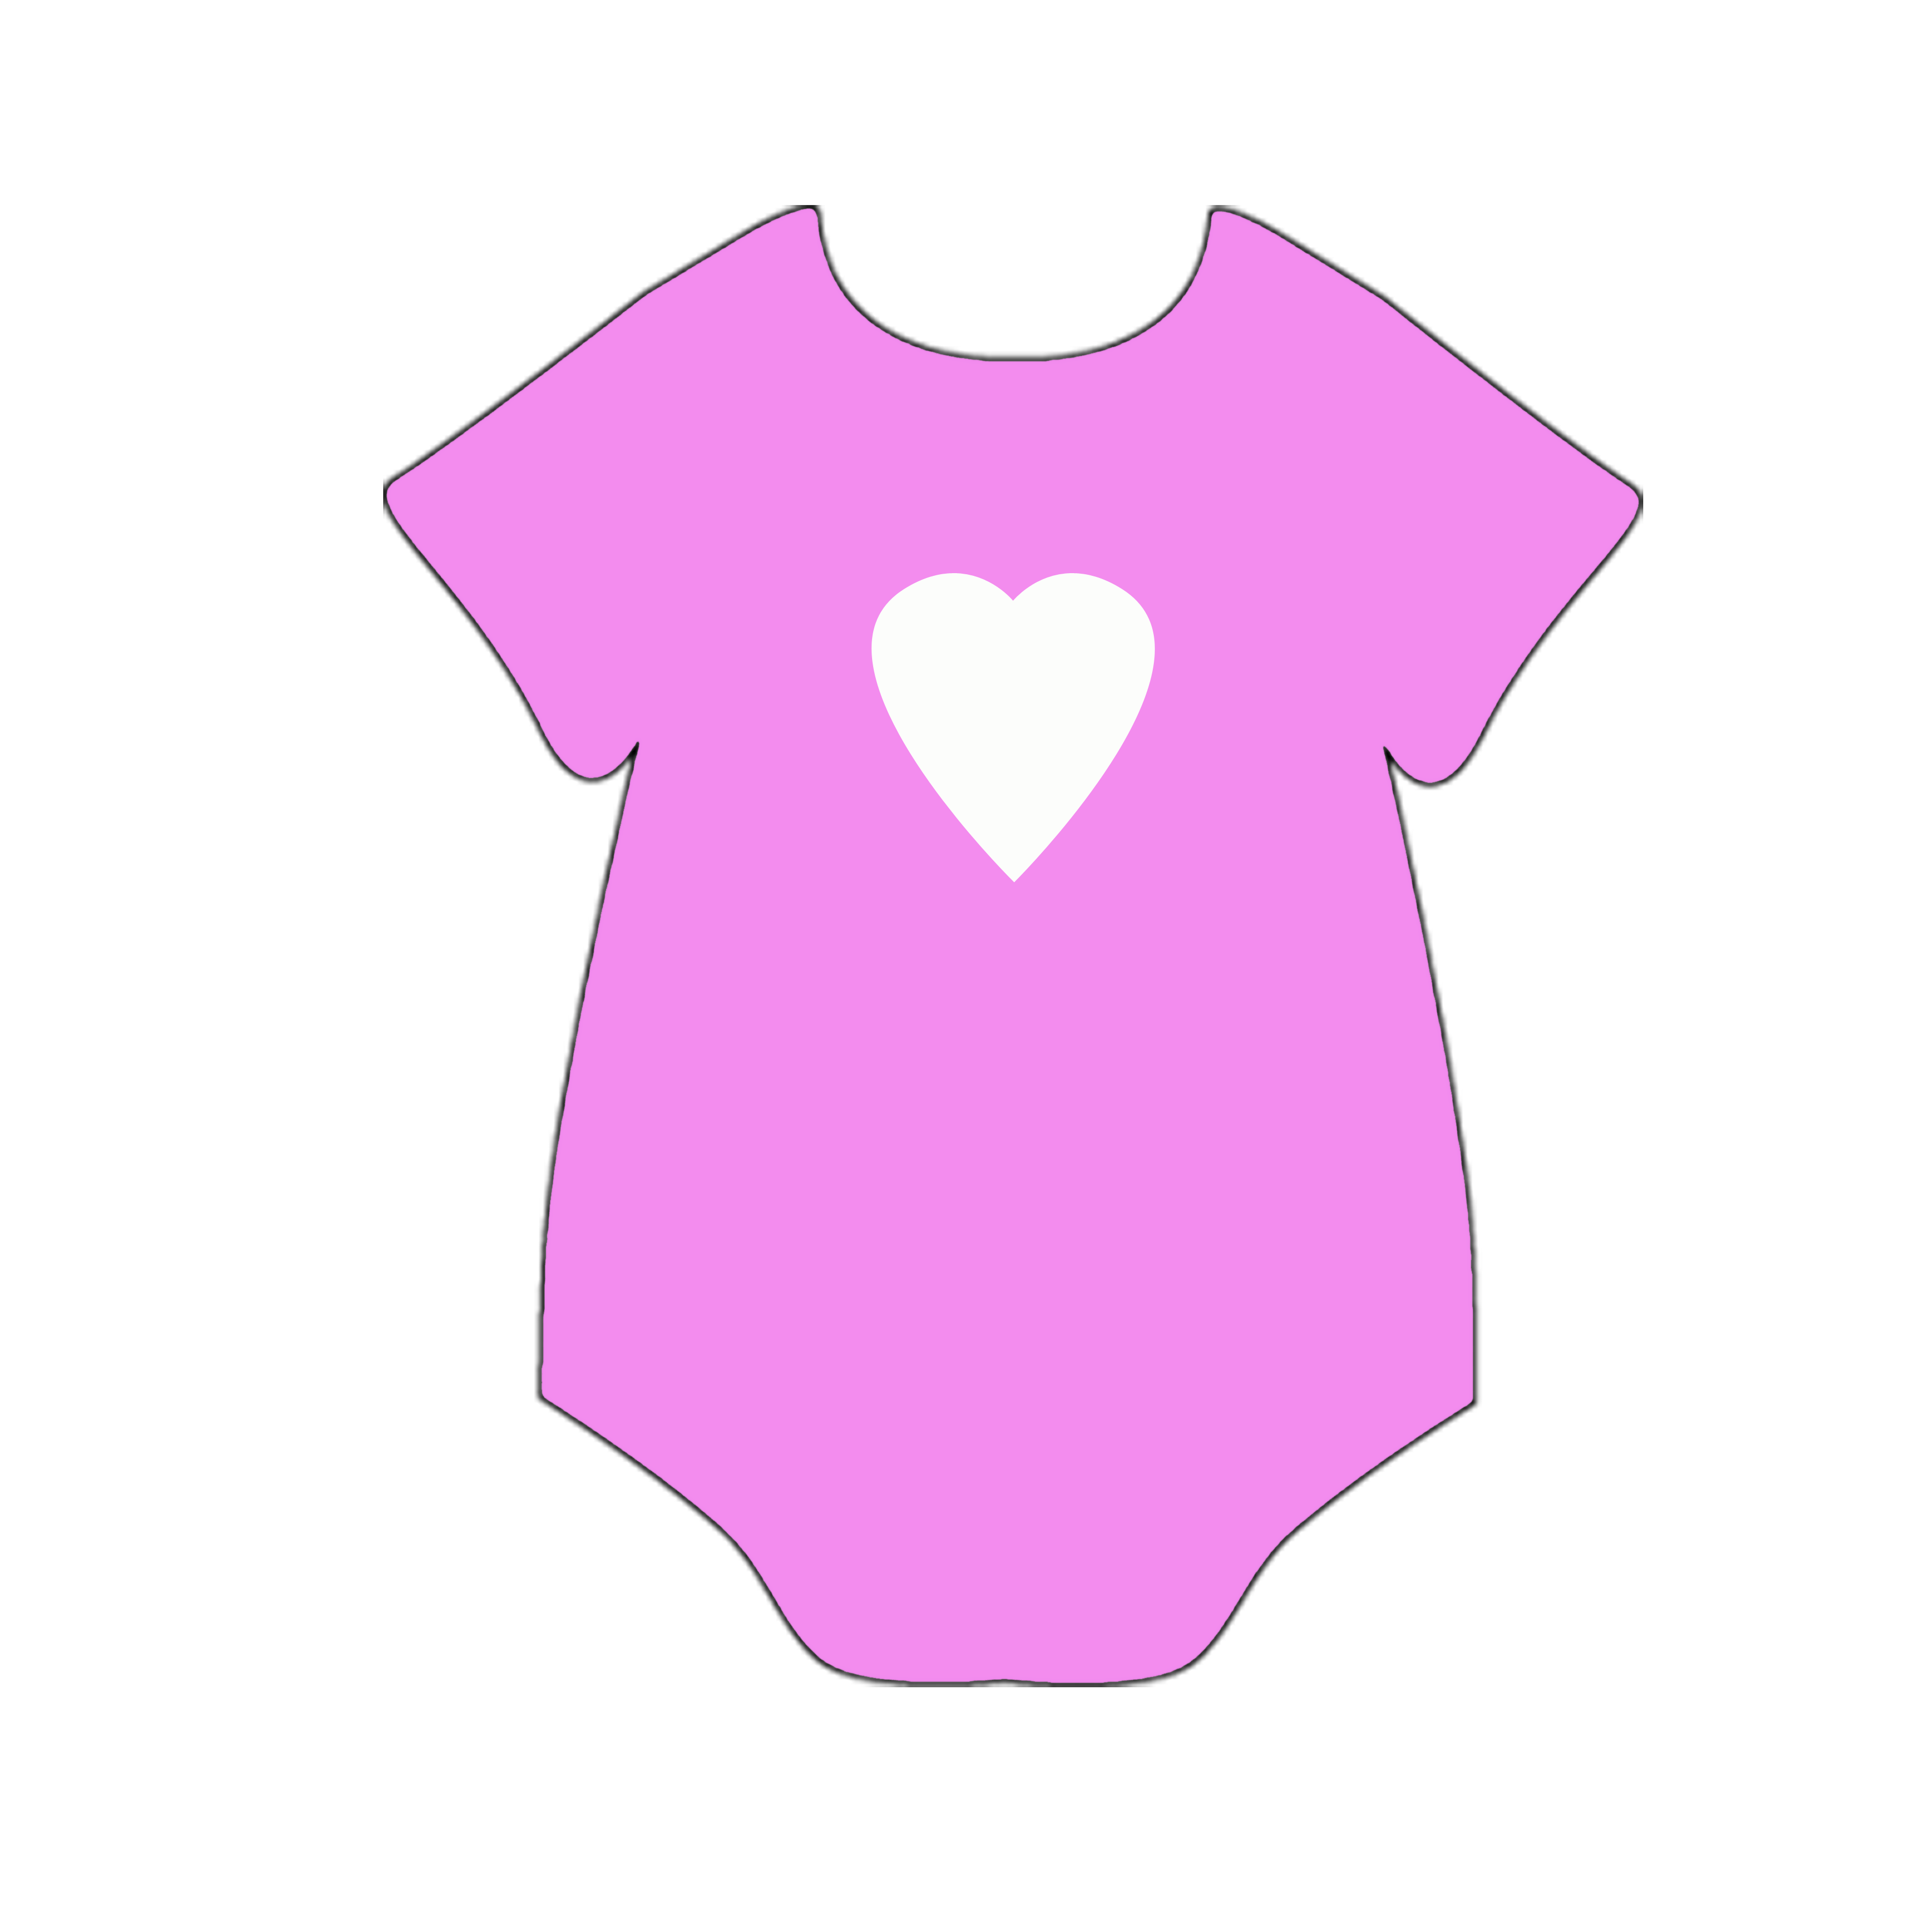  collection of free. Tutu clipart football onesie